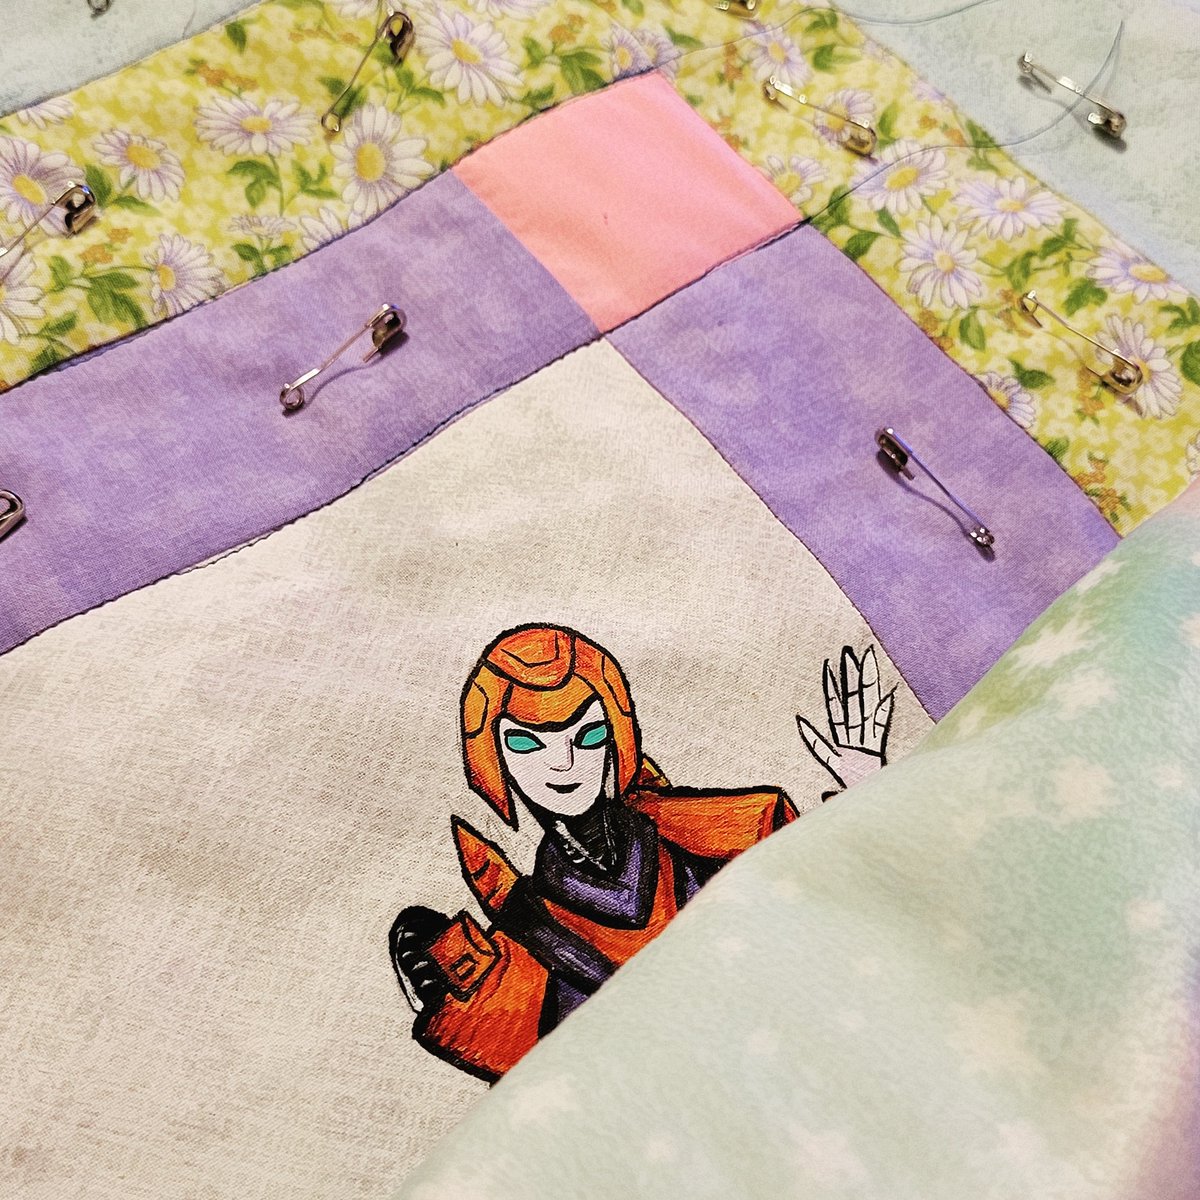 Sewing the sides of the #Transformers #babyquilt together

#quilting #transformerspainting #fabricpainting